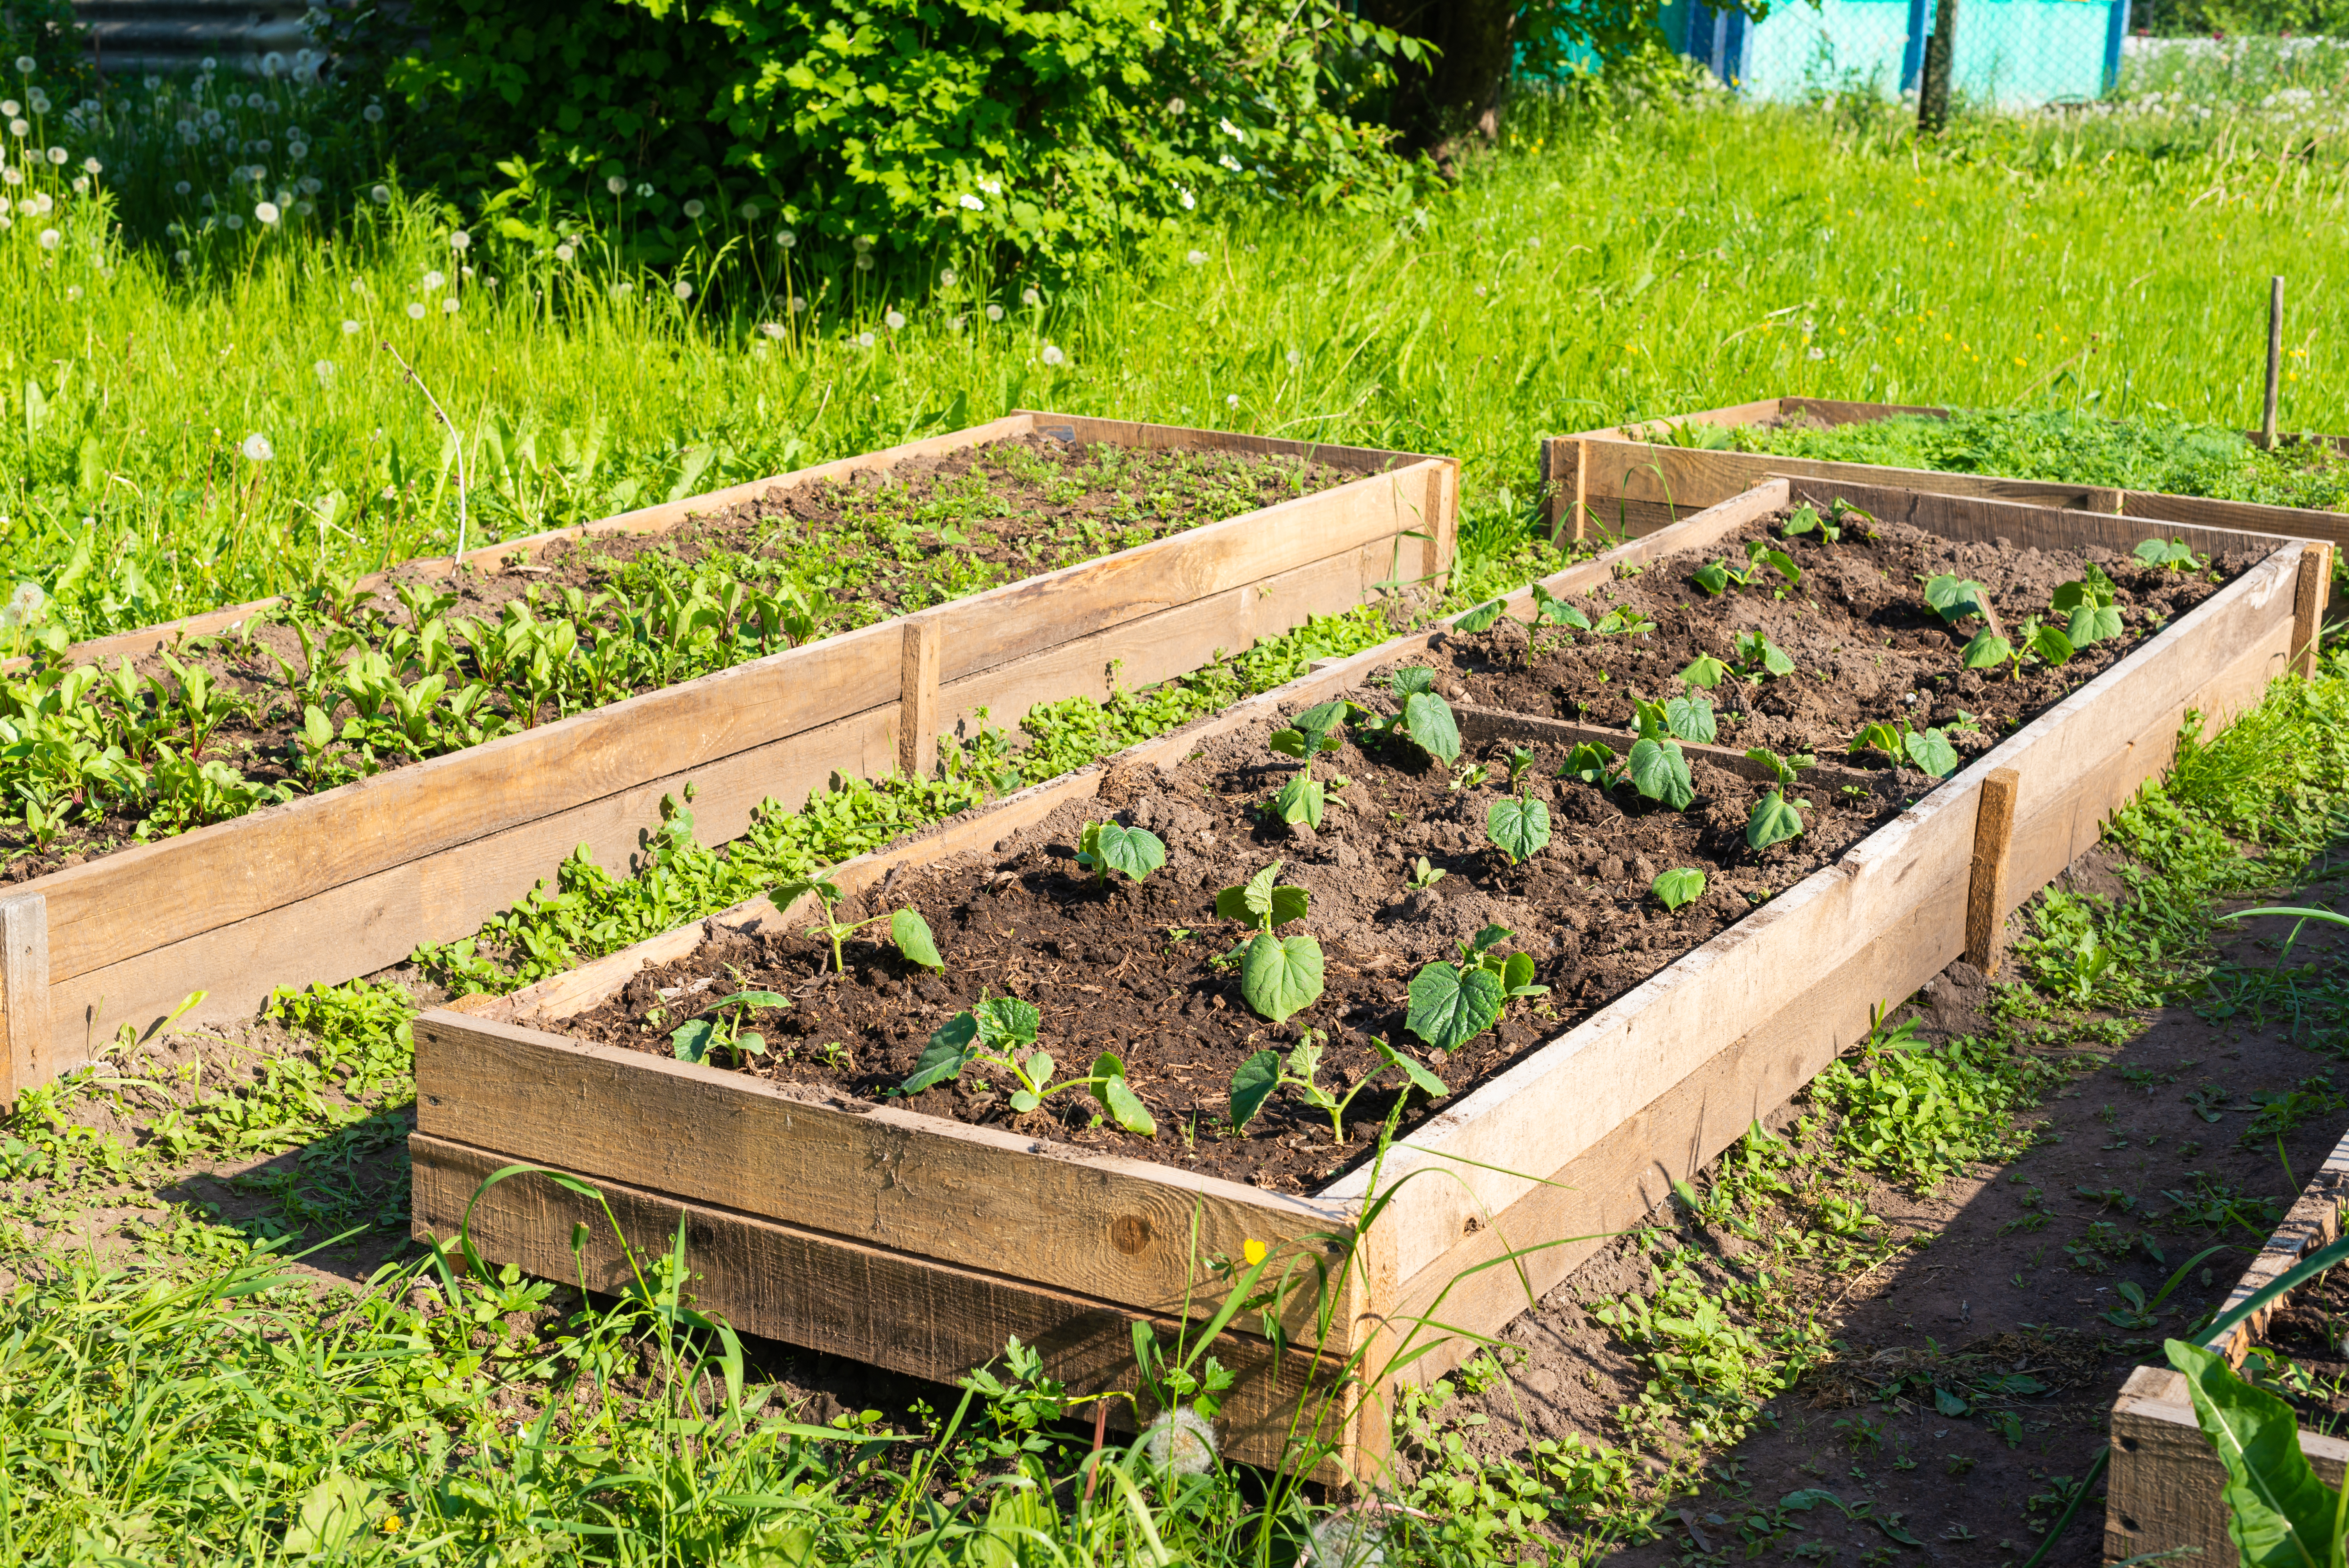 Raised garden beds with wooden edges planted out with young plants